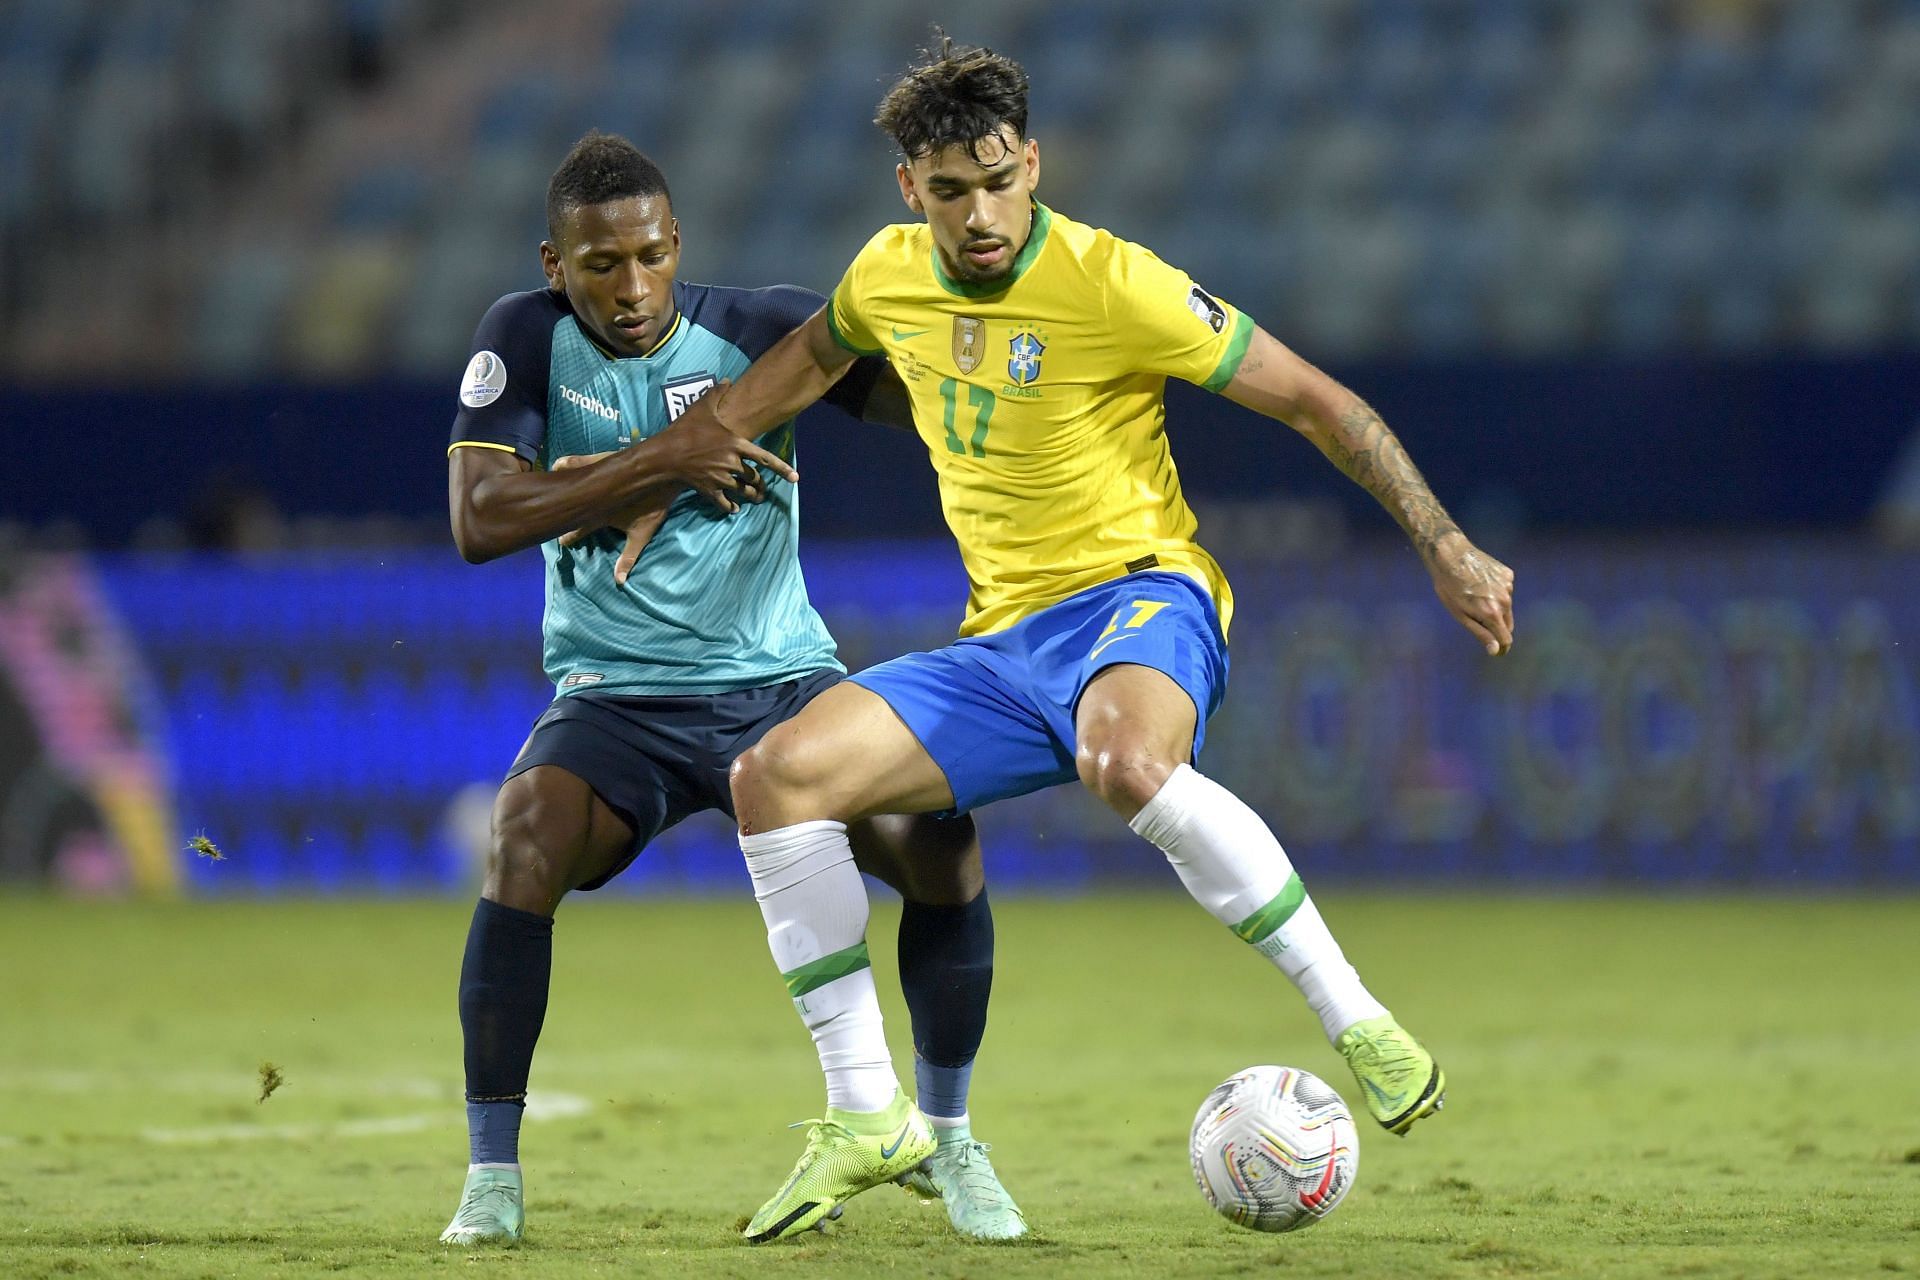 Lucas Paqueta has come of his own with Brazil National team